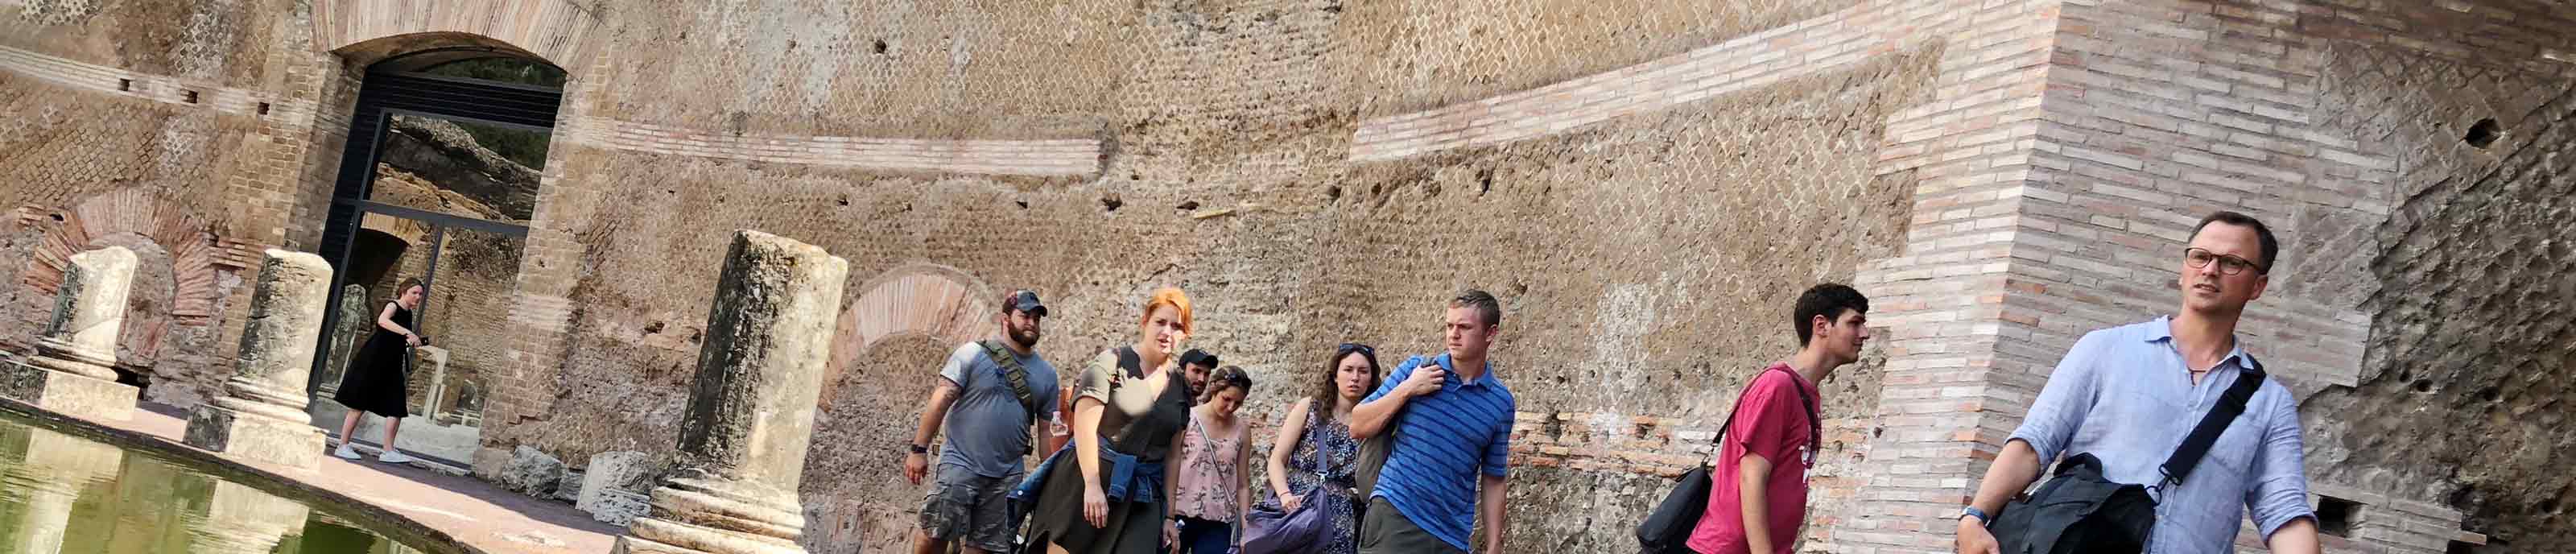 Architecture students at a historical site in Italy